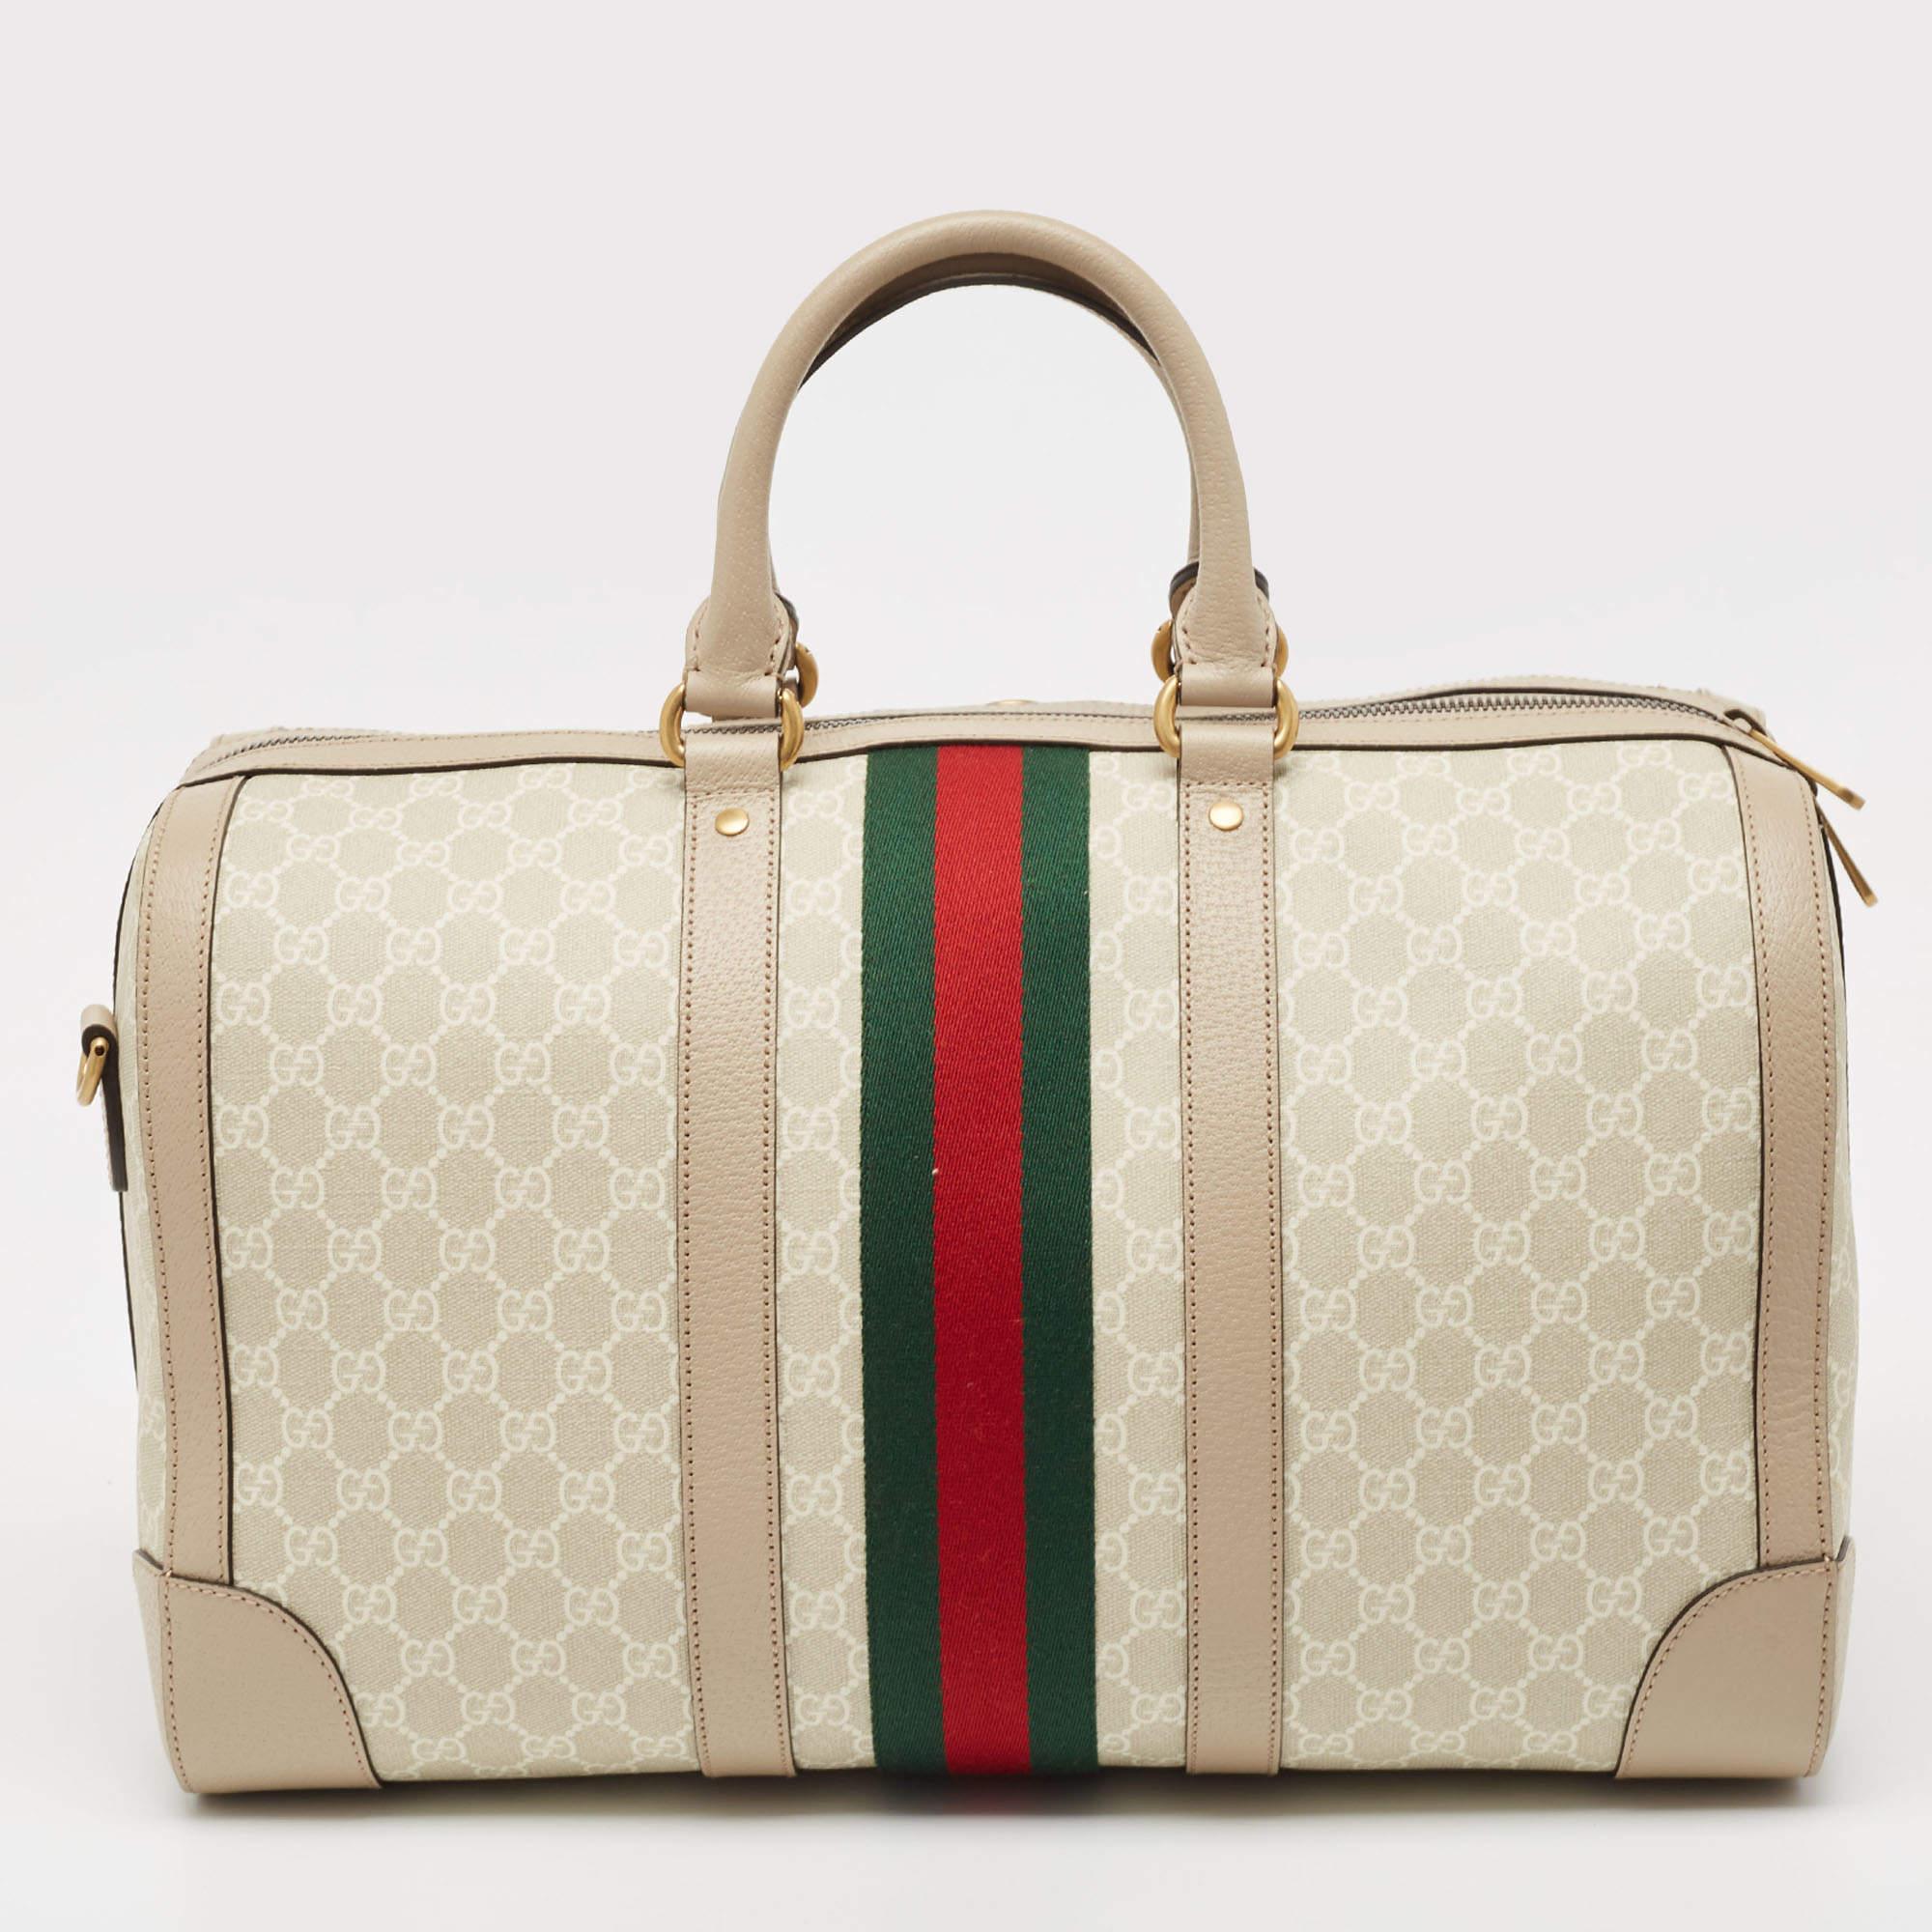 Ensure your travel essentials are in order and your outfit is complete with this Gucci bag. Crafted using the best materials, the bag carries the maison's signature of artful craftsmanship and enduring appeal.

